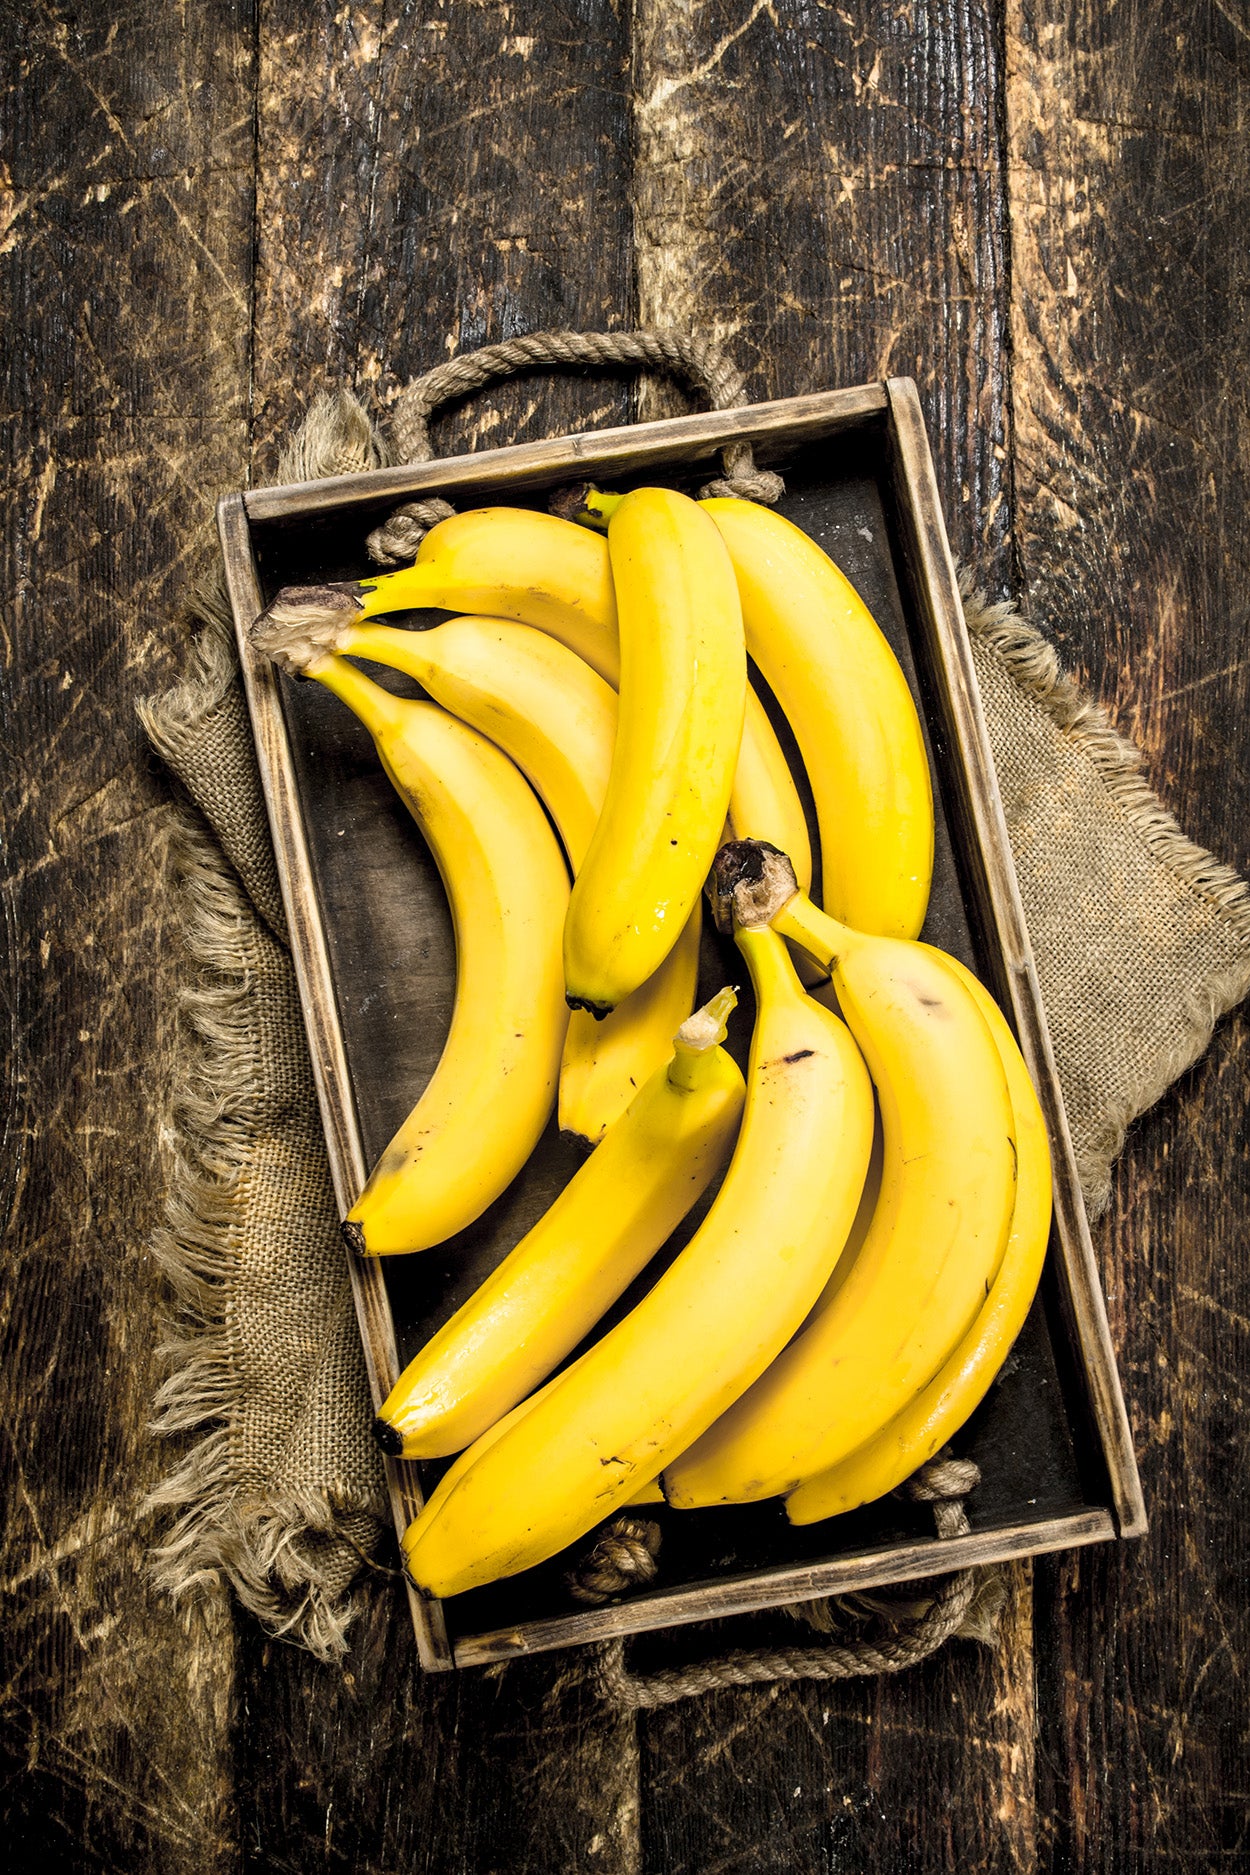 Top 5 Tips for Storing Bananas: Keep Your Fruit Fresh and Tasty!